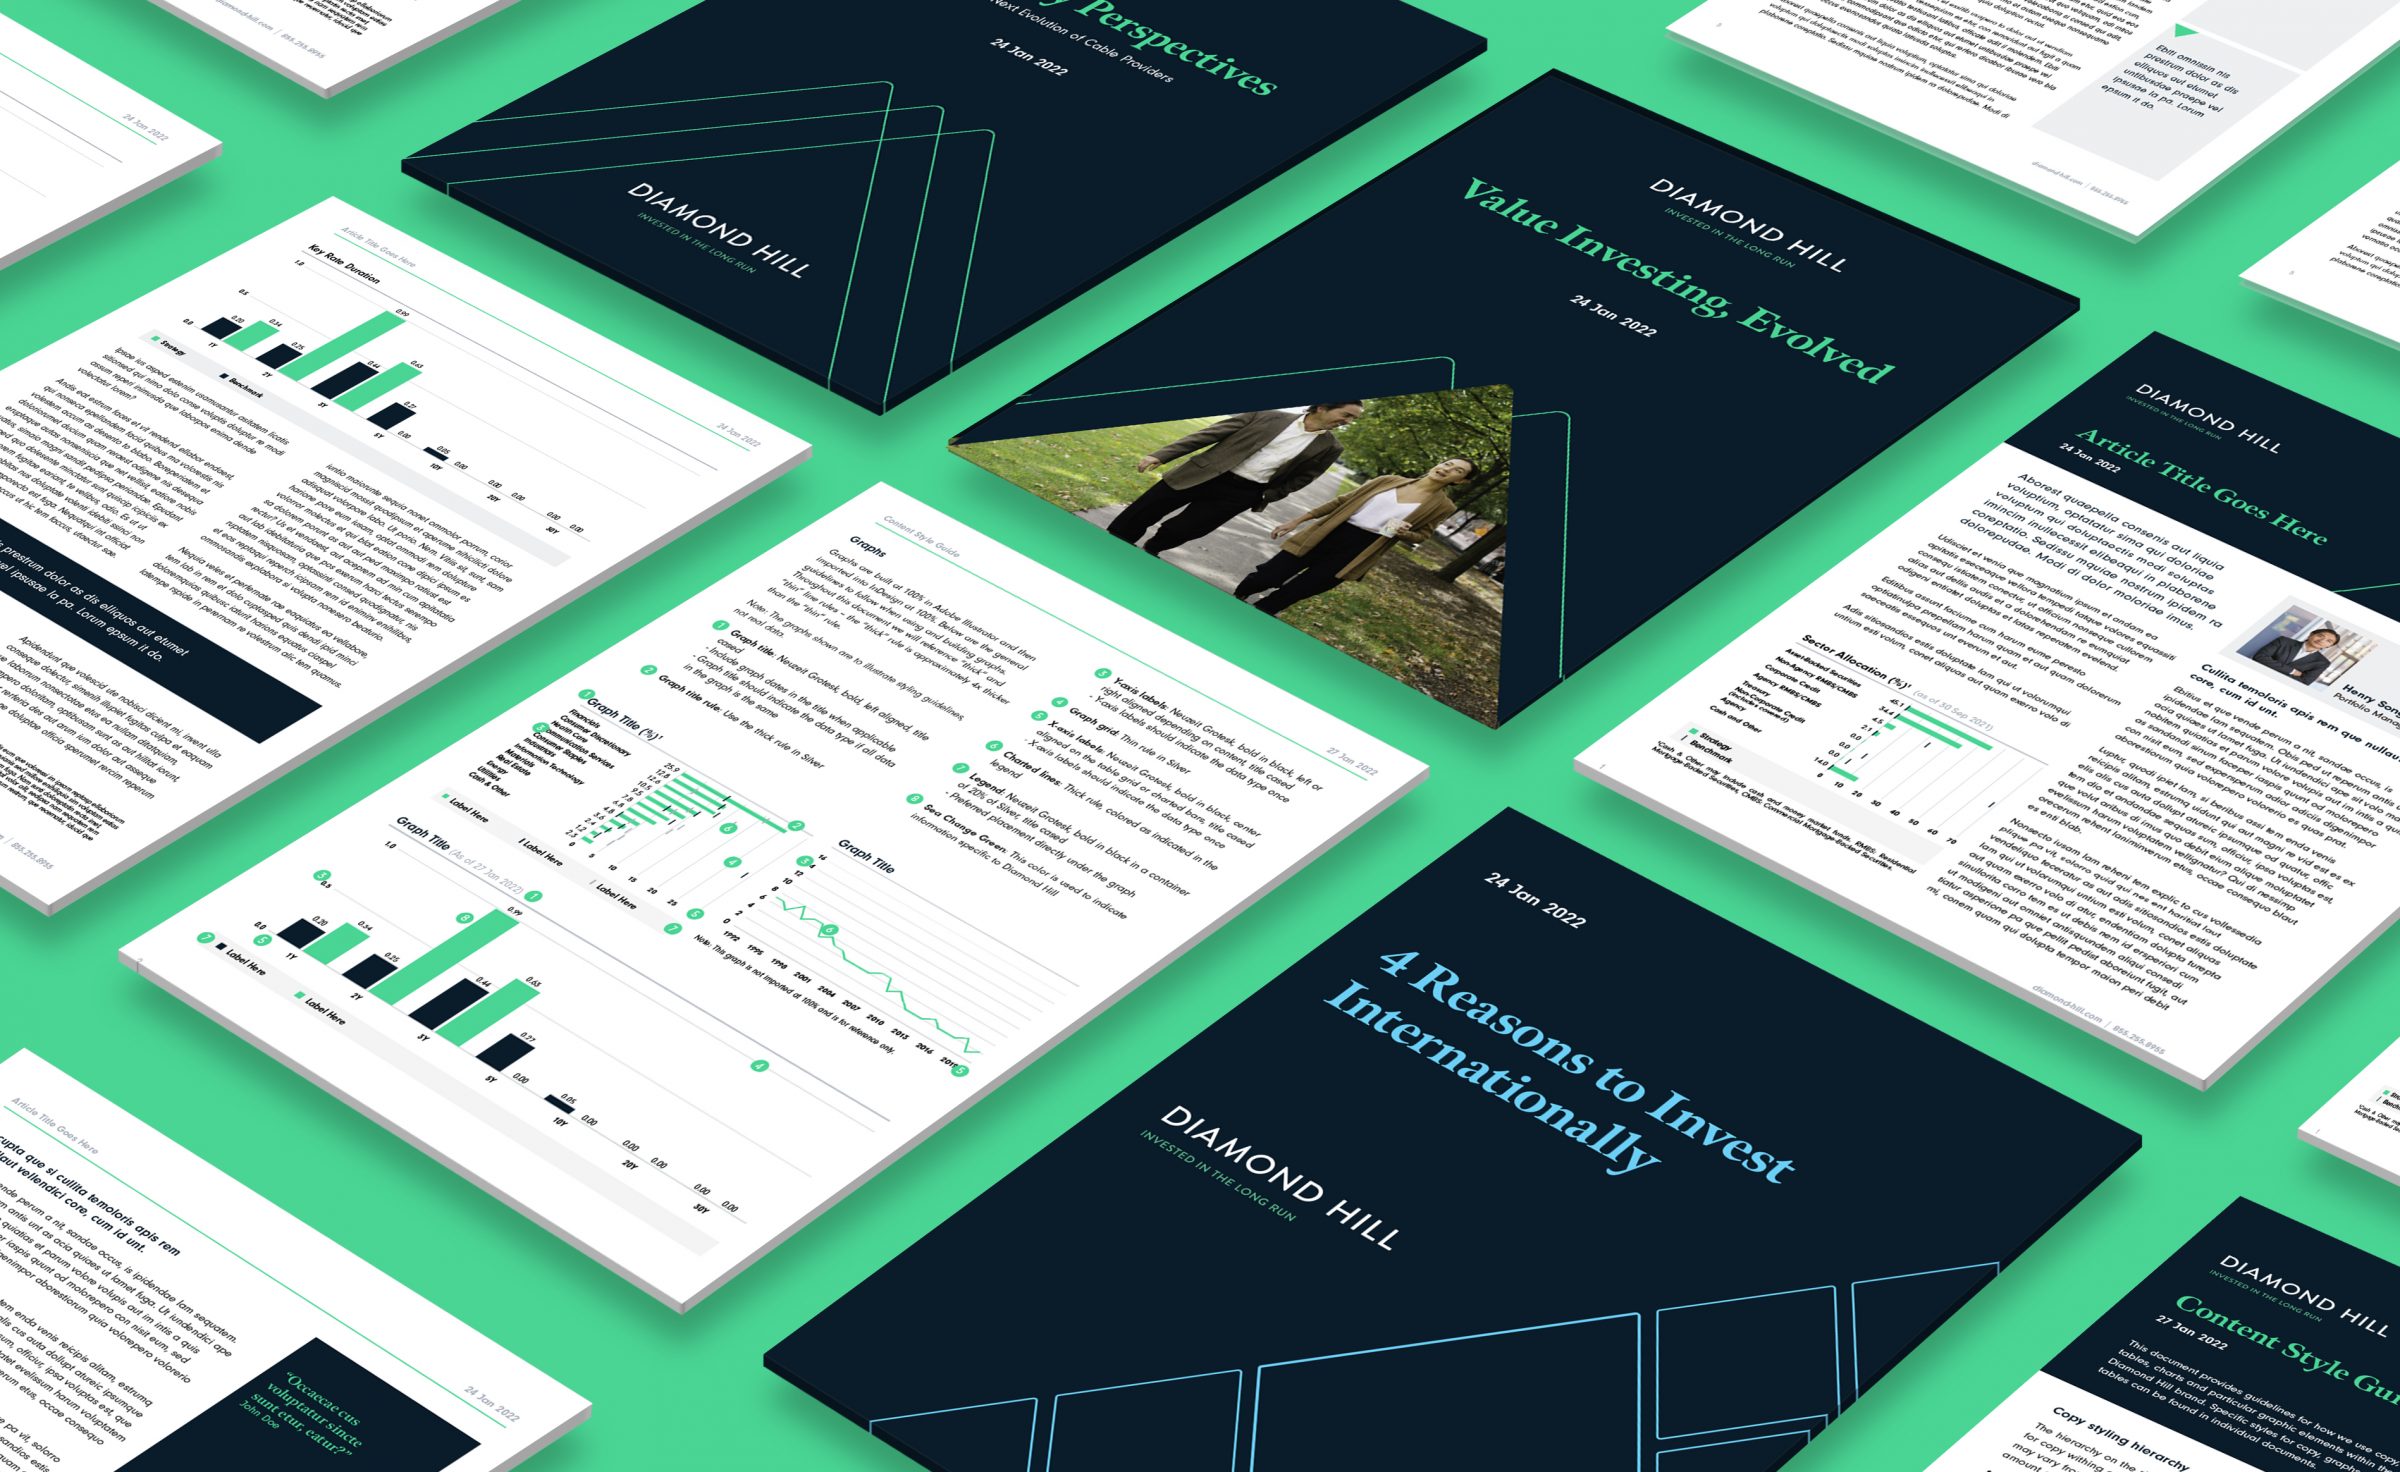 A grid of Diamond Hill folder covers, branded report papers and graphs on a green background illustrate the breadth of creative we made.